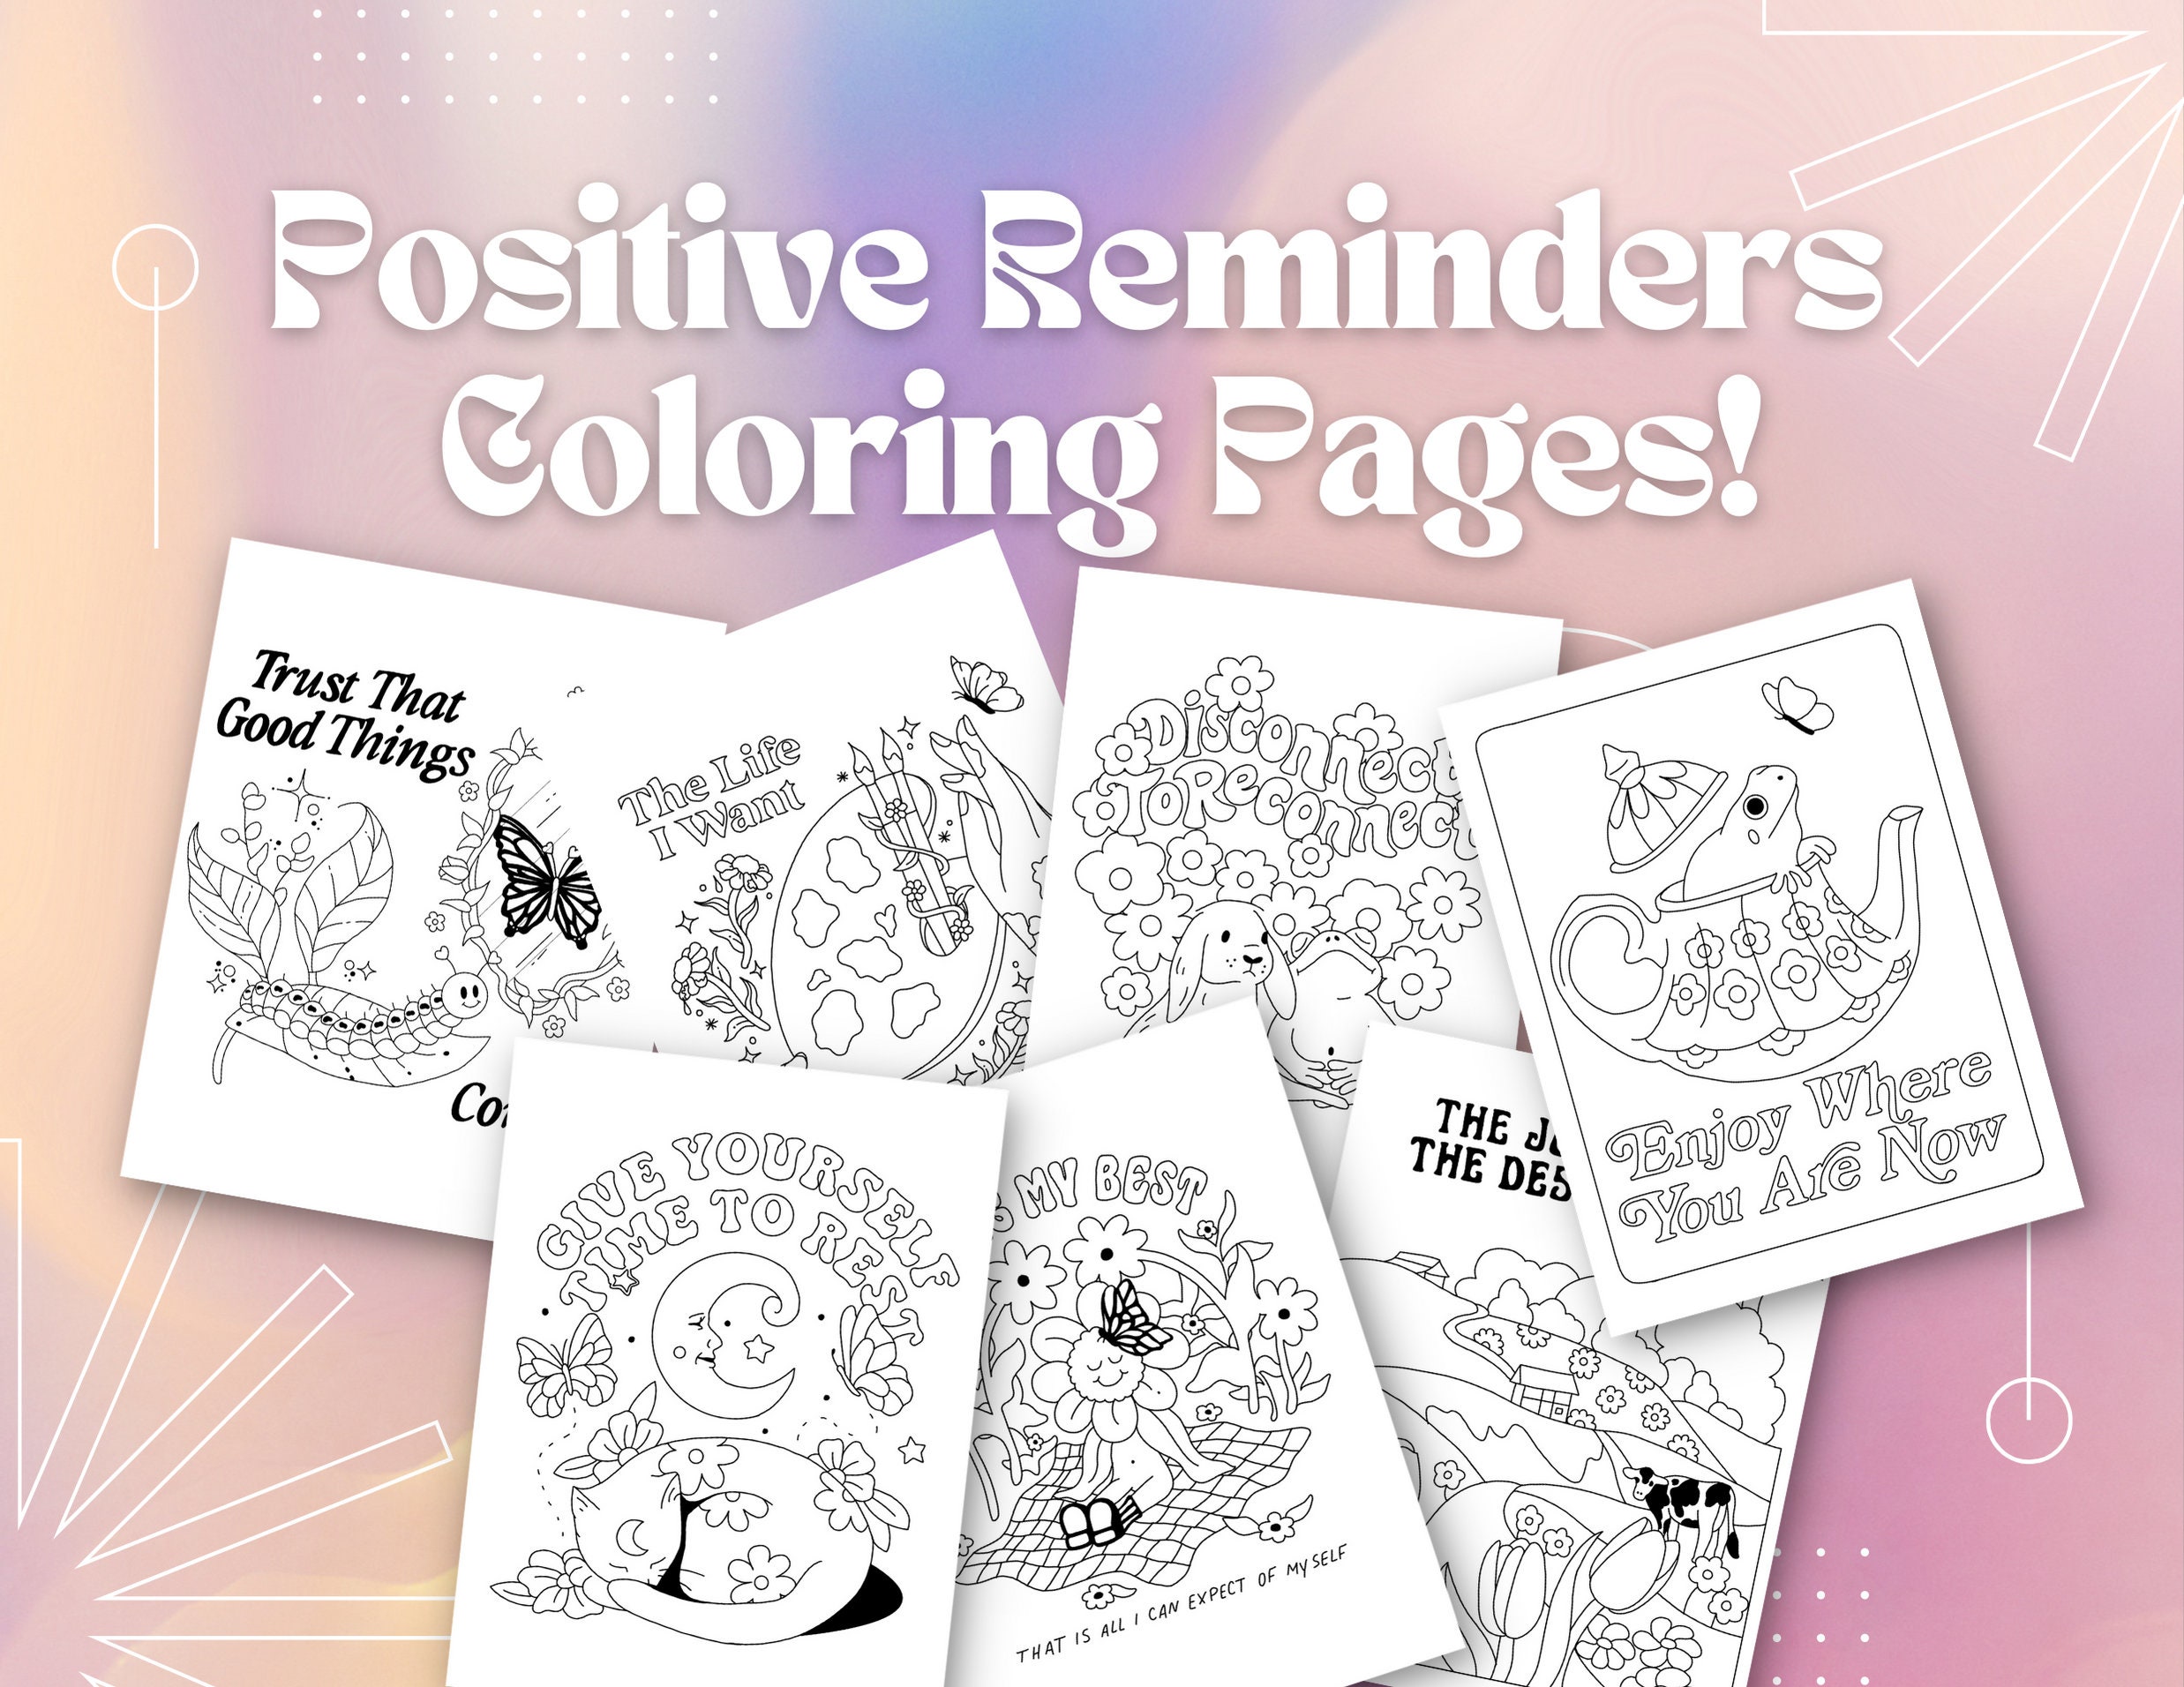 bobbie goods coloring pages for youu!🫶🏼